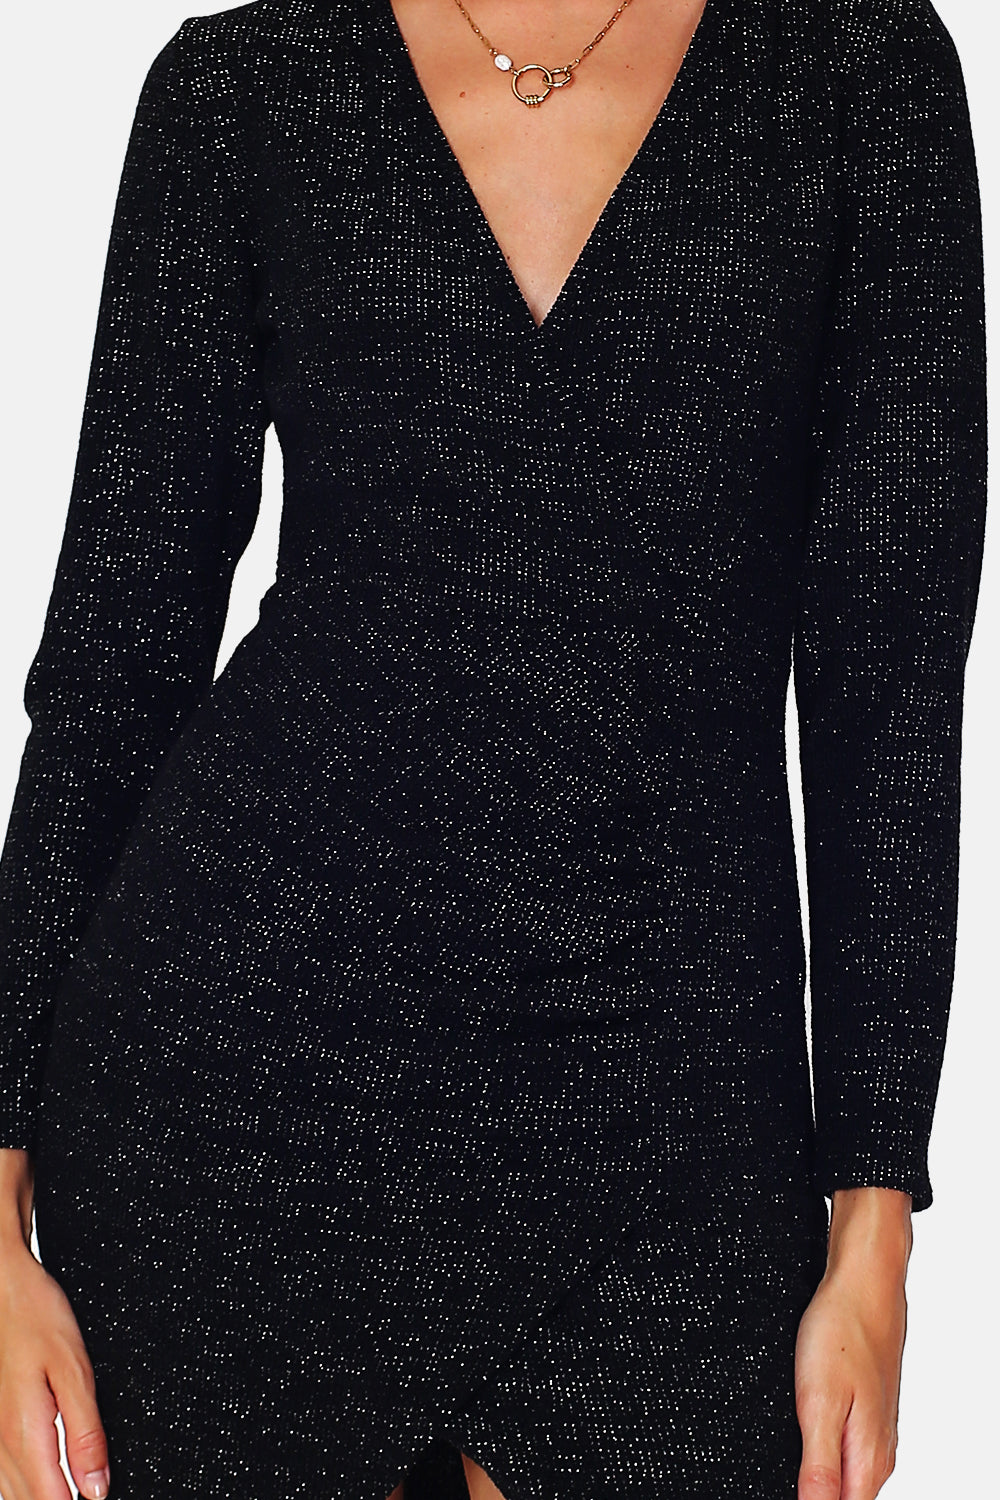 V-neck crossover dress with long sleeves